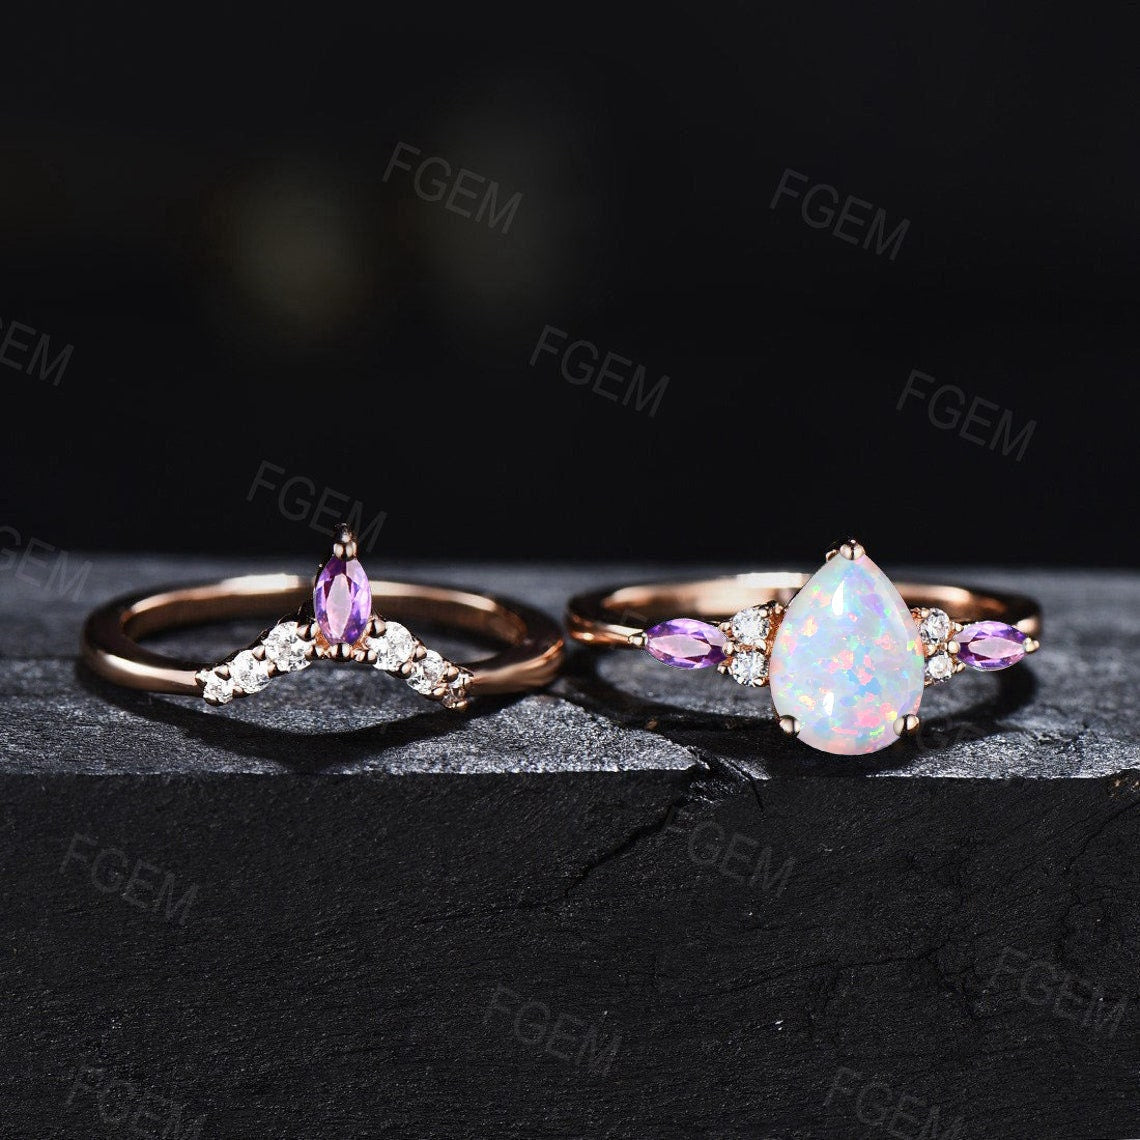 1.25ct Pear Shaped White Opal Engagement Ring Set Sterling Silver Curve Moissanite Amethyst Wedding Ring Promise Ring Birthday Gift Women